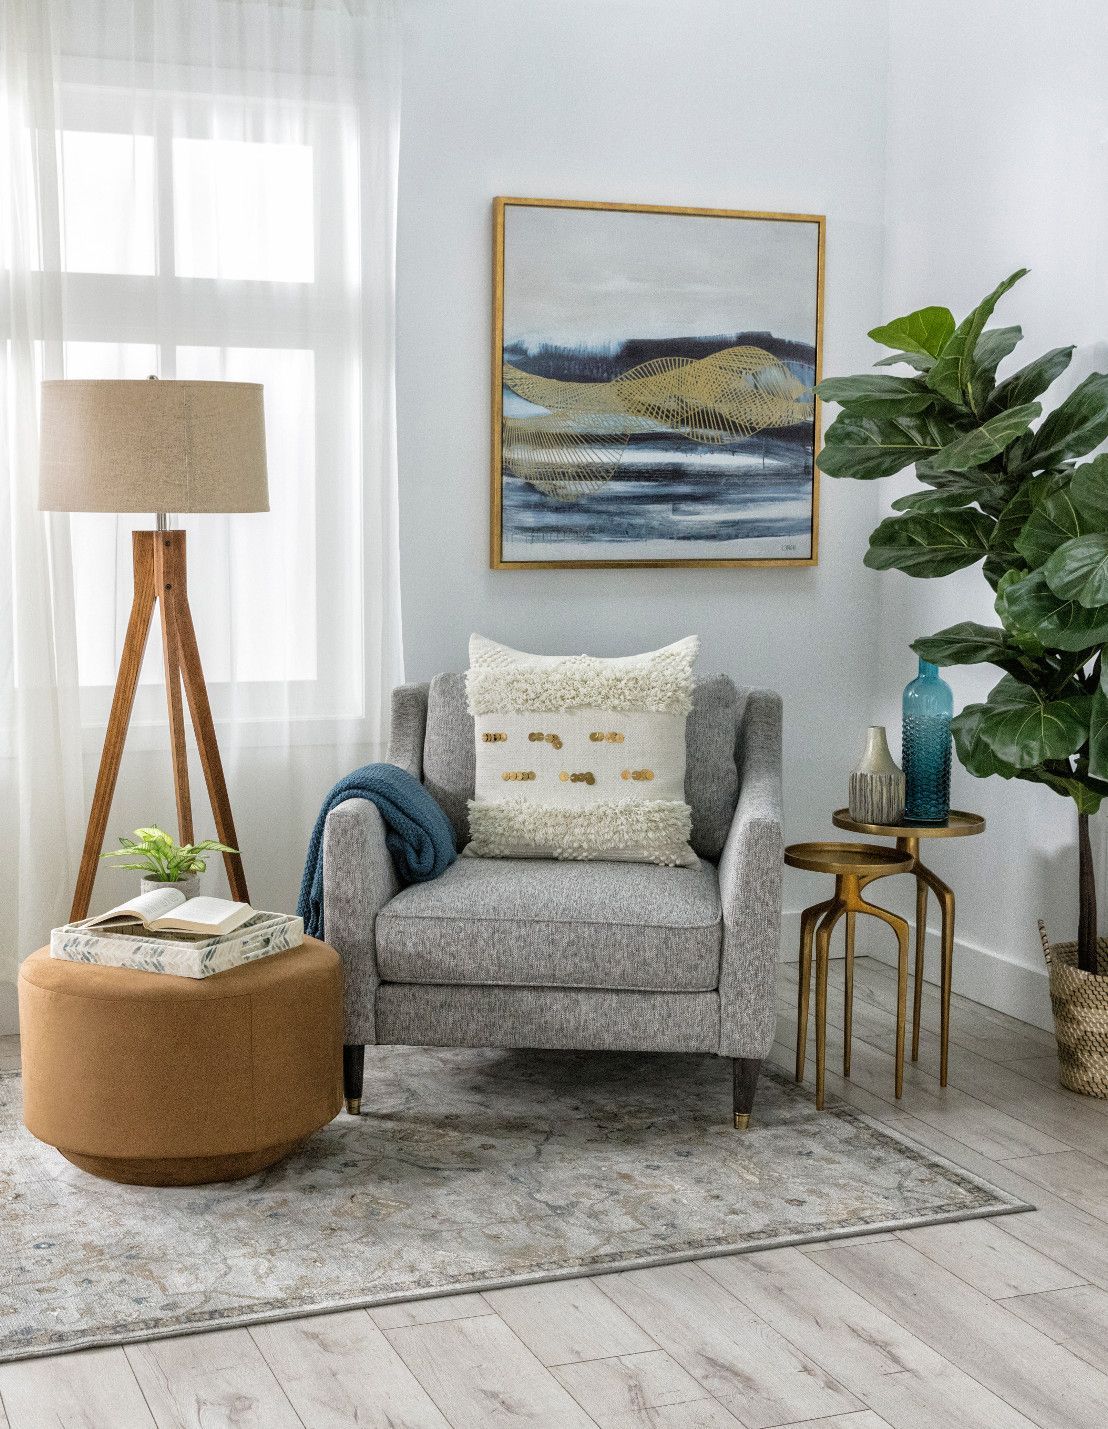 Ames Arm Chairnate Berkus And Jeremiah Brent In 2018 | Mid Inside Ames Arm Sofa Chairs By Nate Berkus And Jeremiah Brent (View 3 of 25)